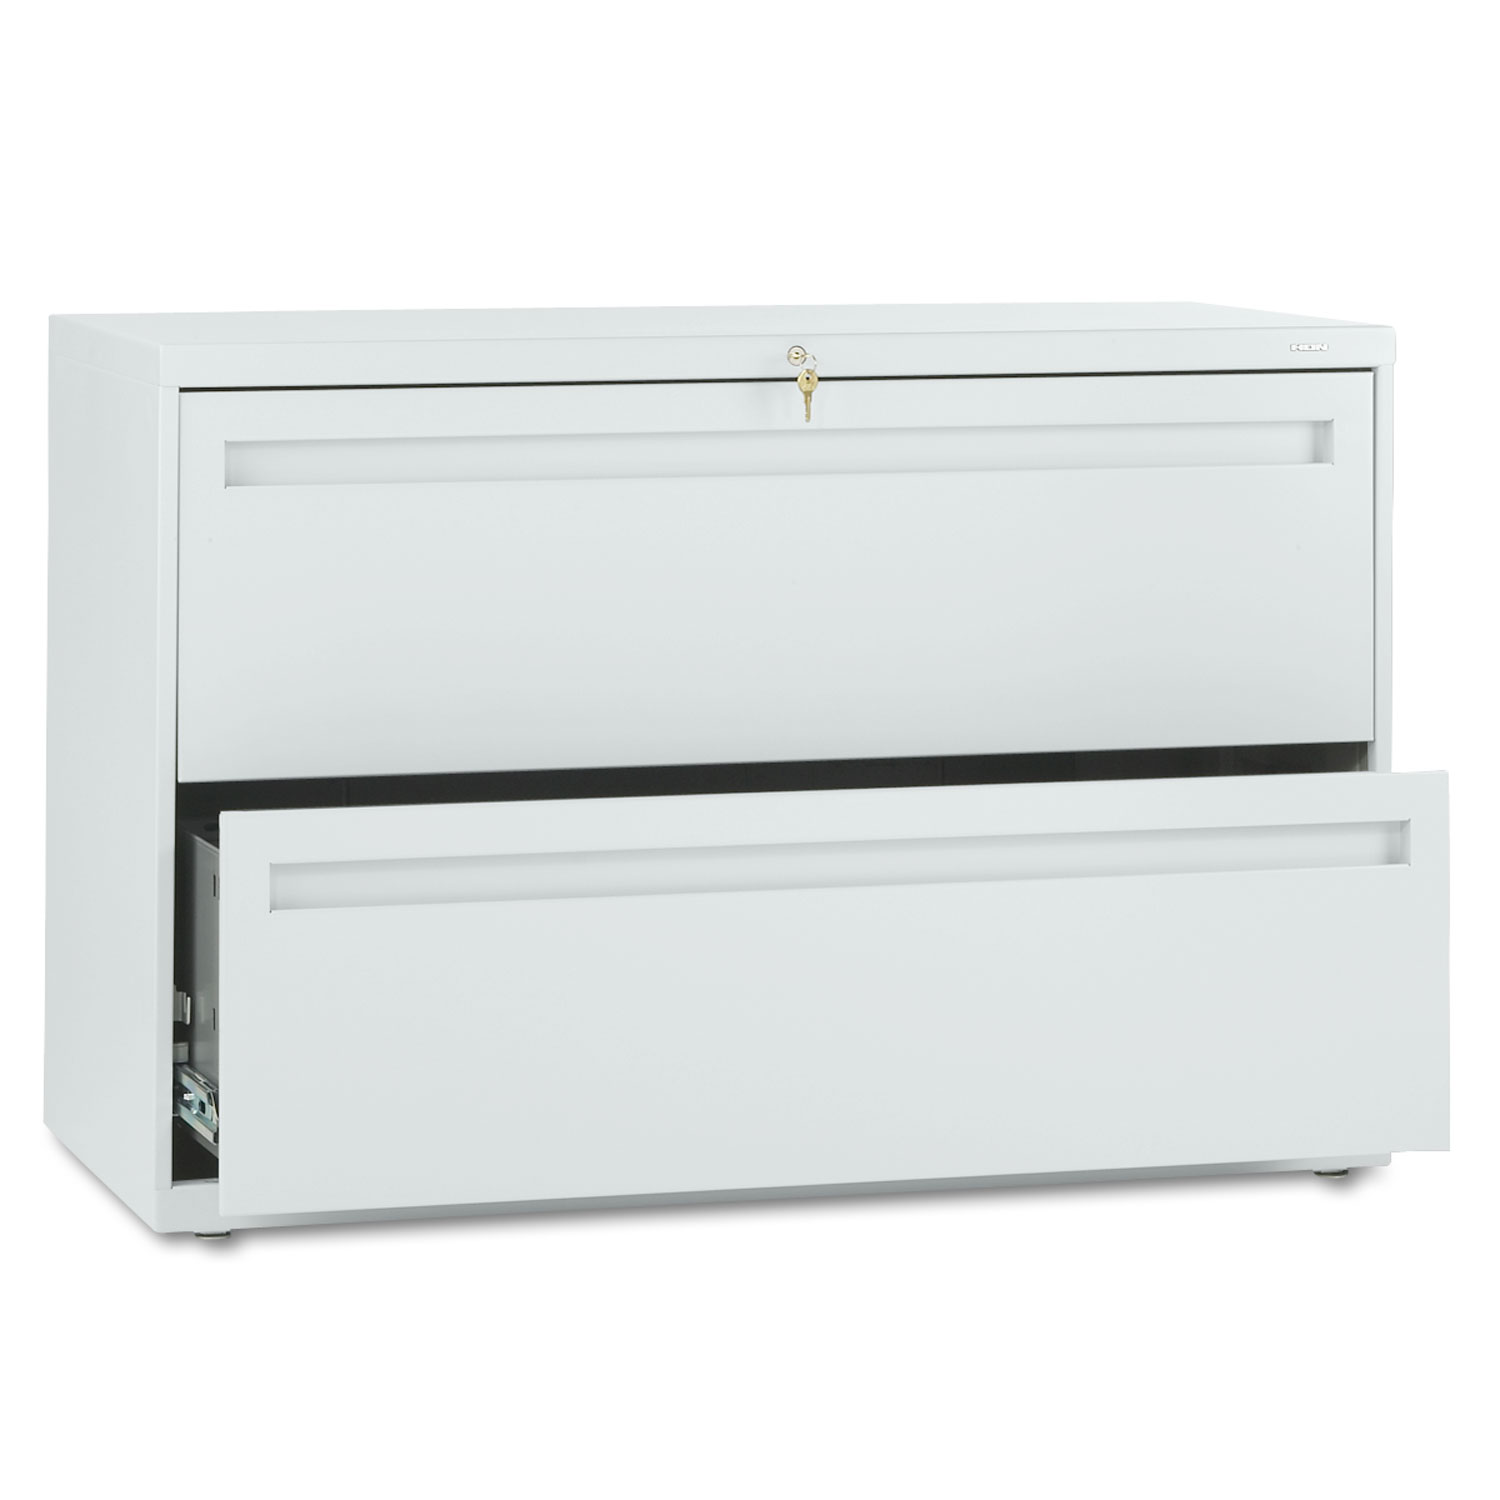 700 Series Two-Drawer Lateral File, 42w x 19-1/4d, Light Gray